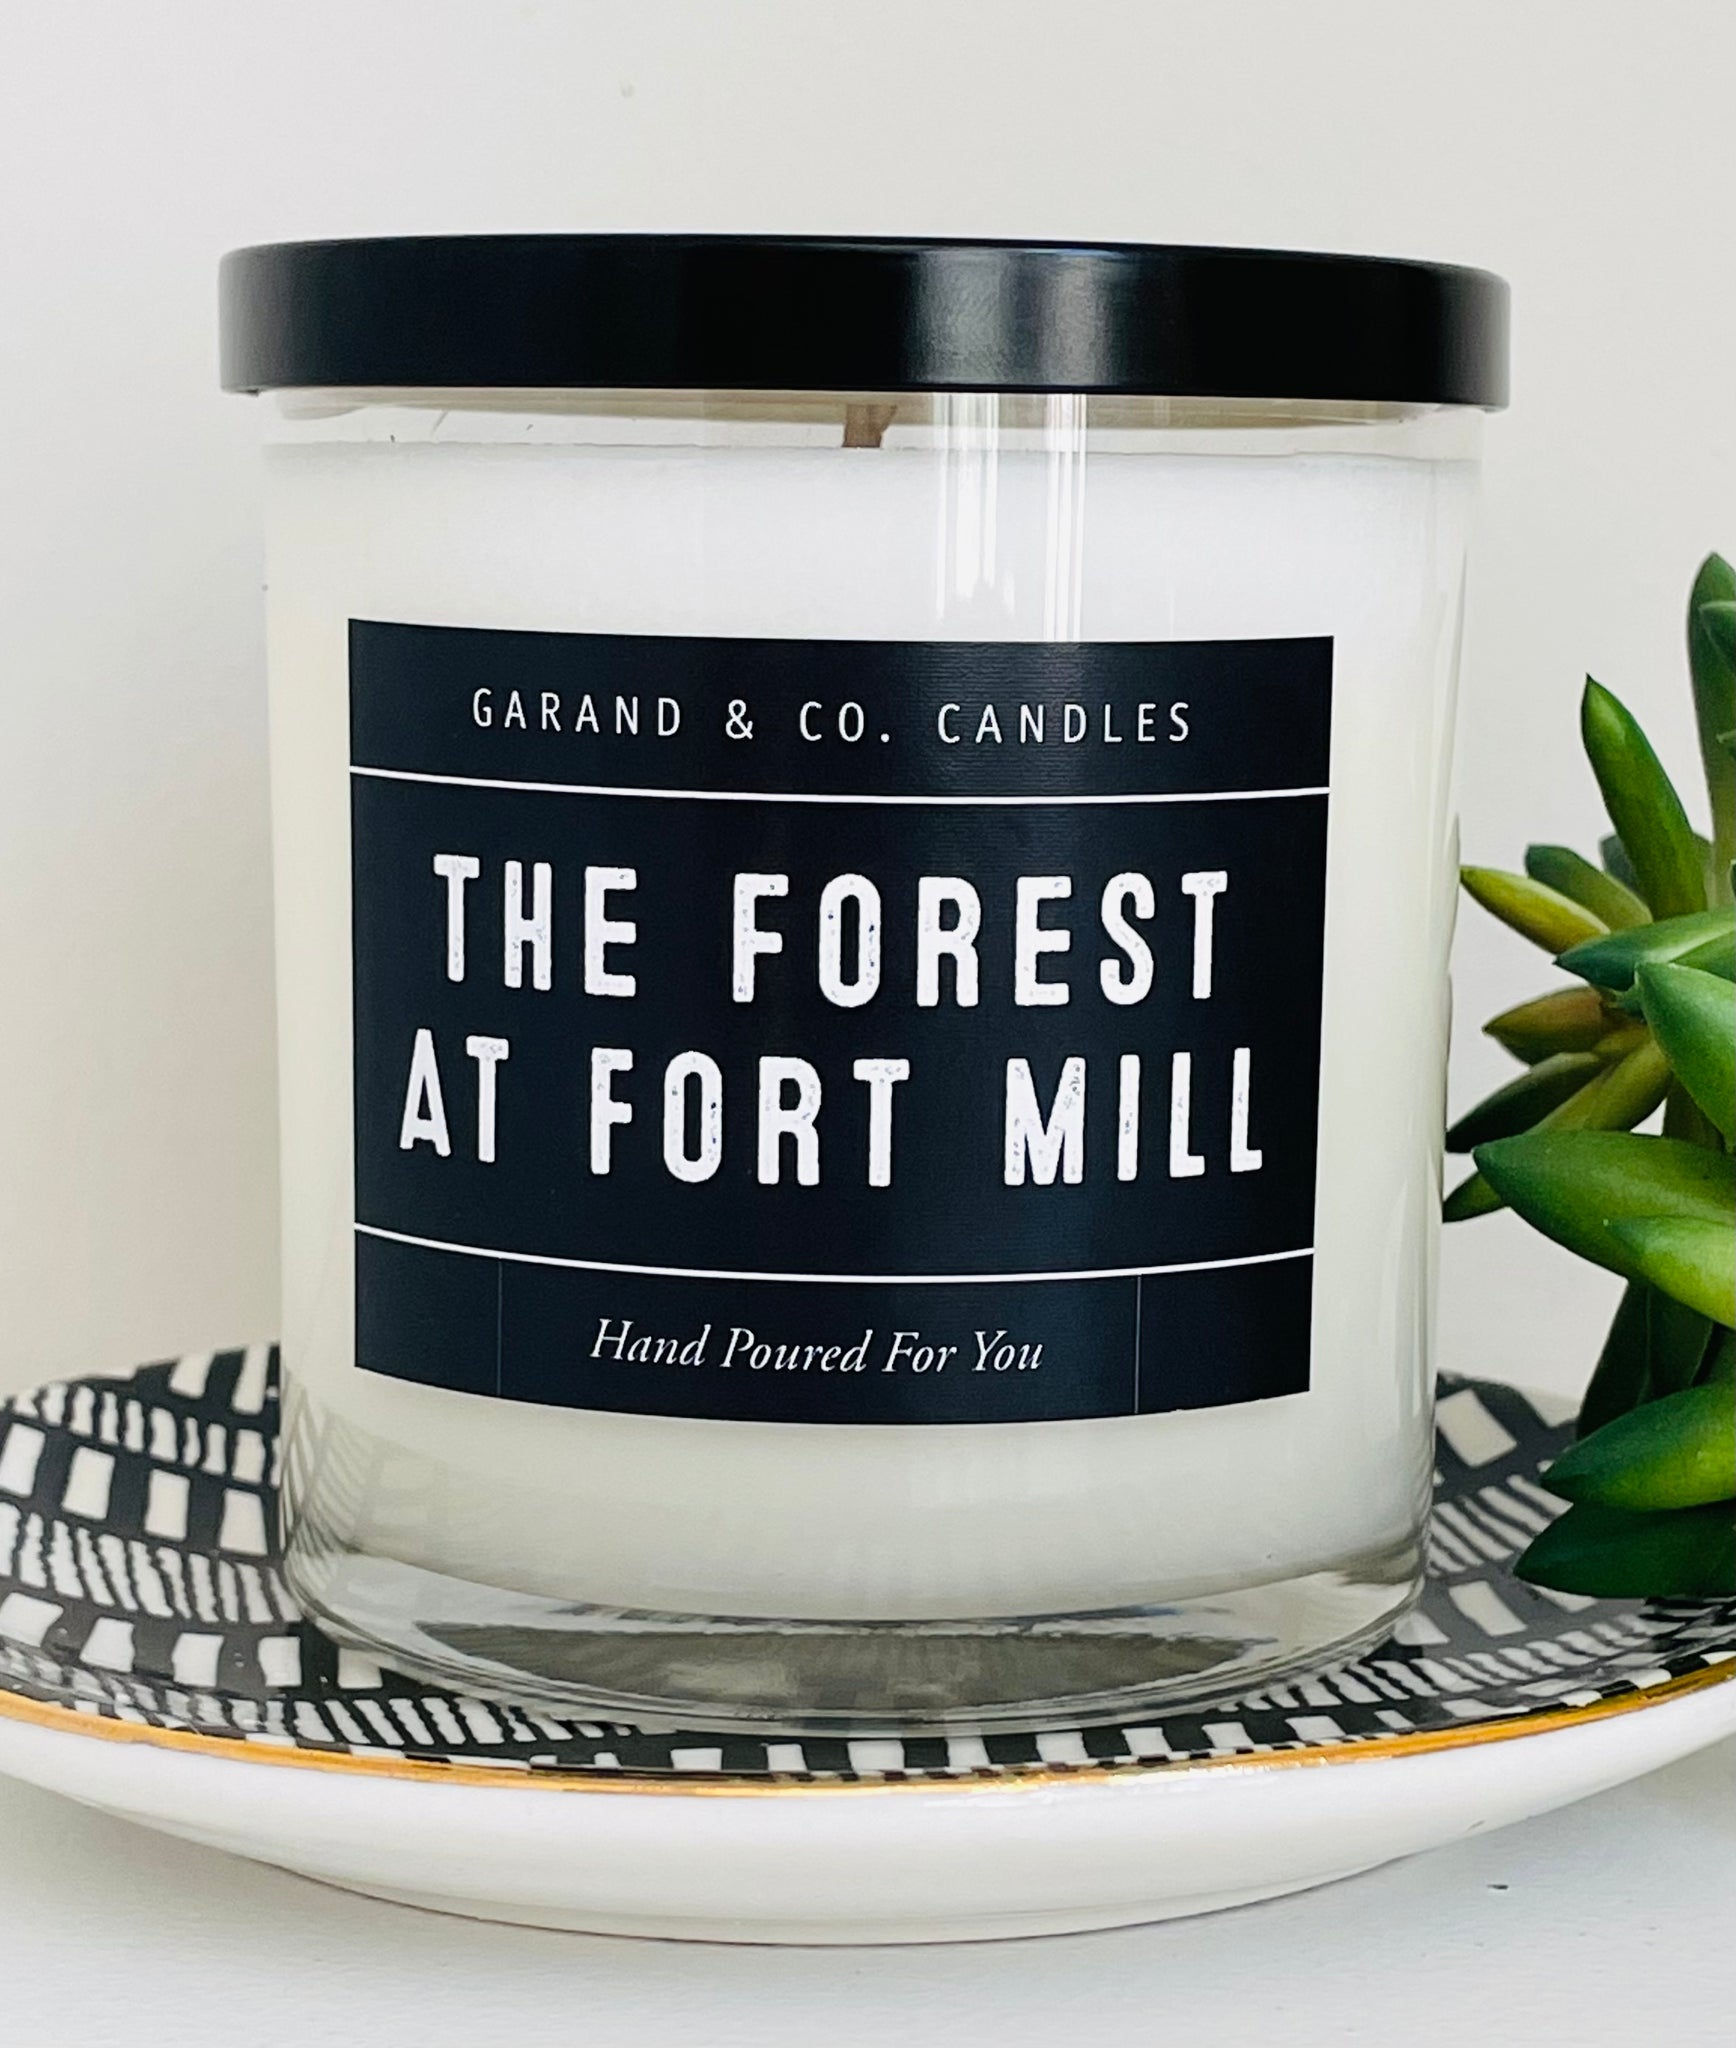 12 oz Clear Glass Jar Candle - The Forest Fort Mill, SC